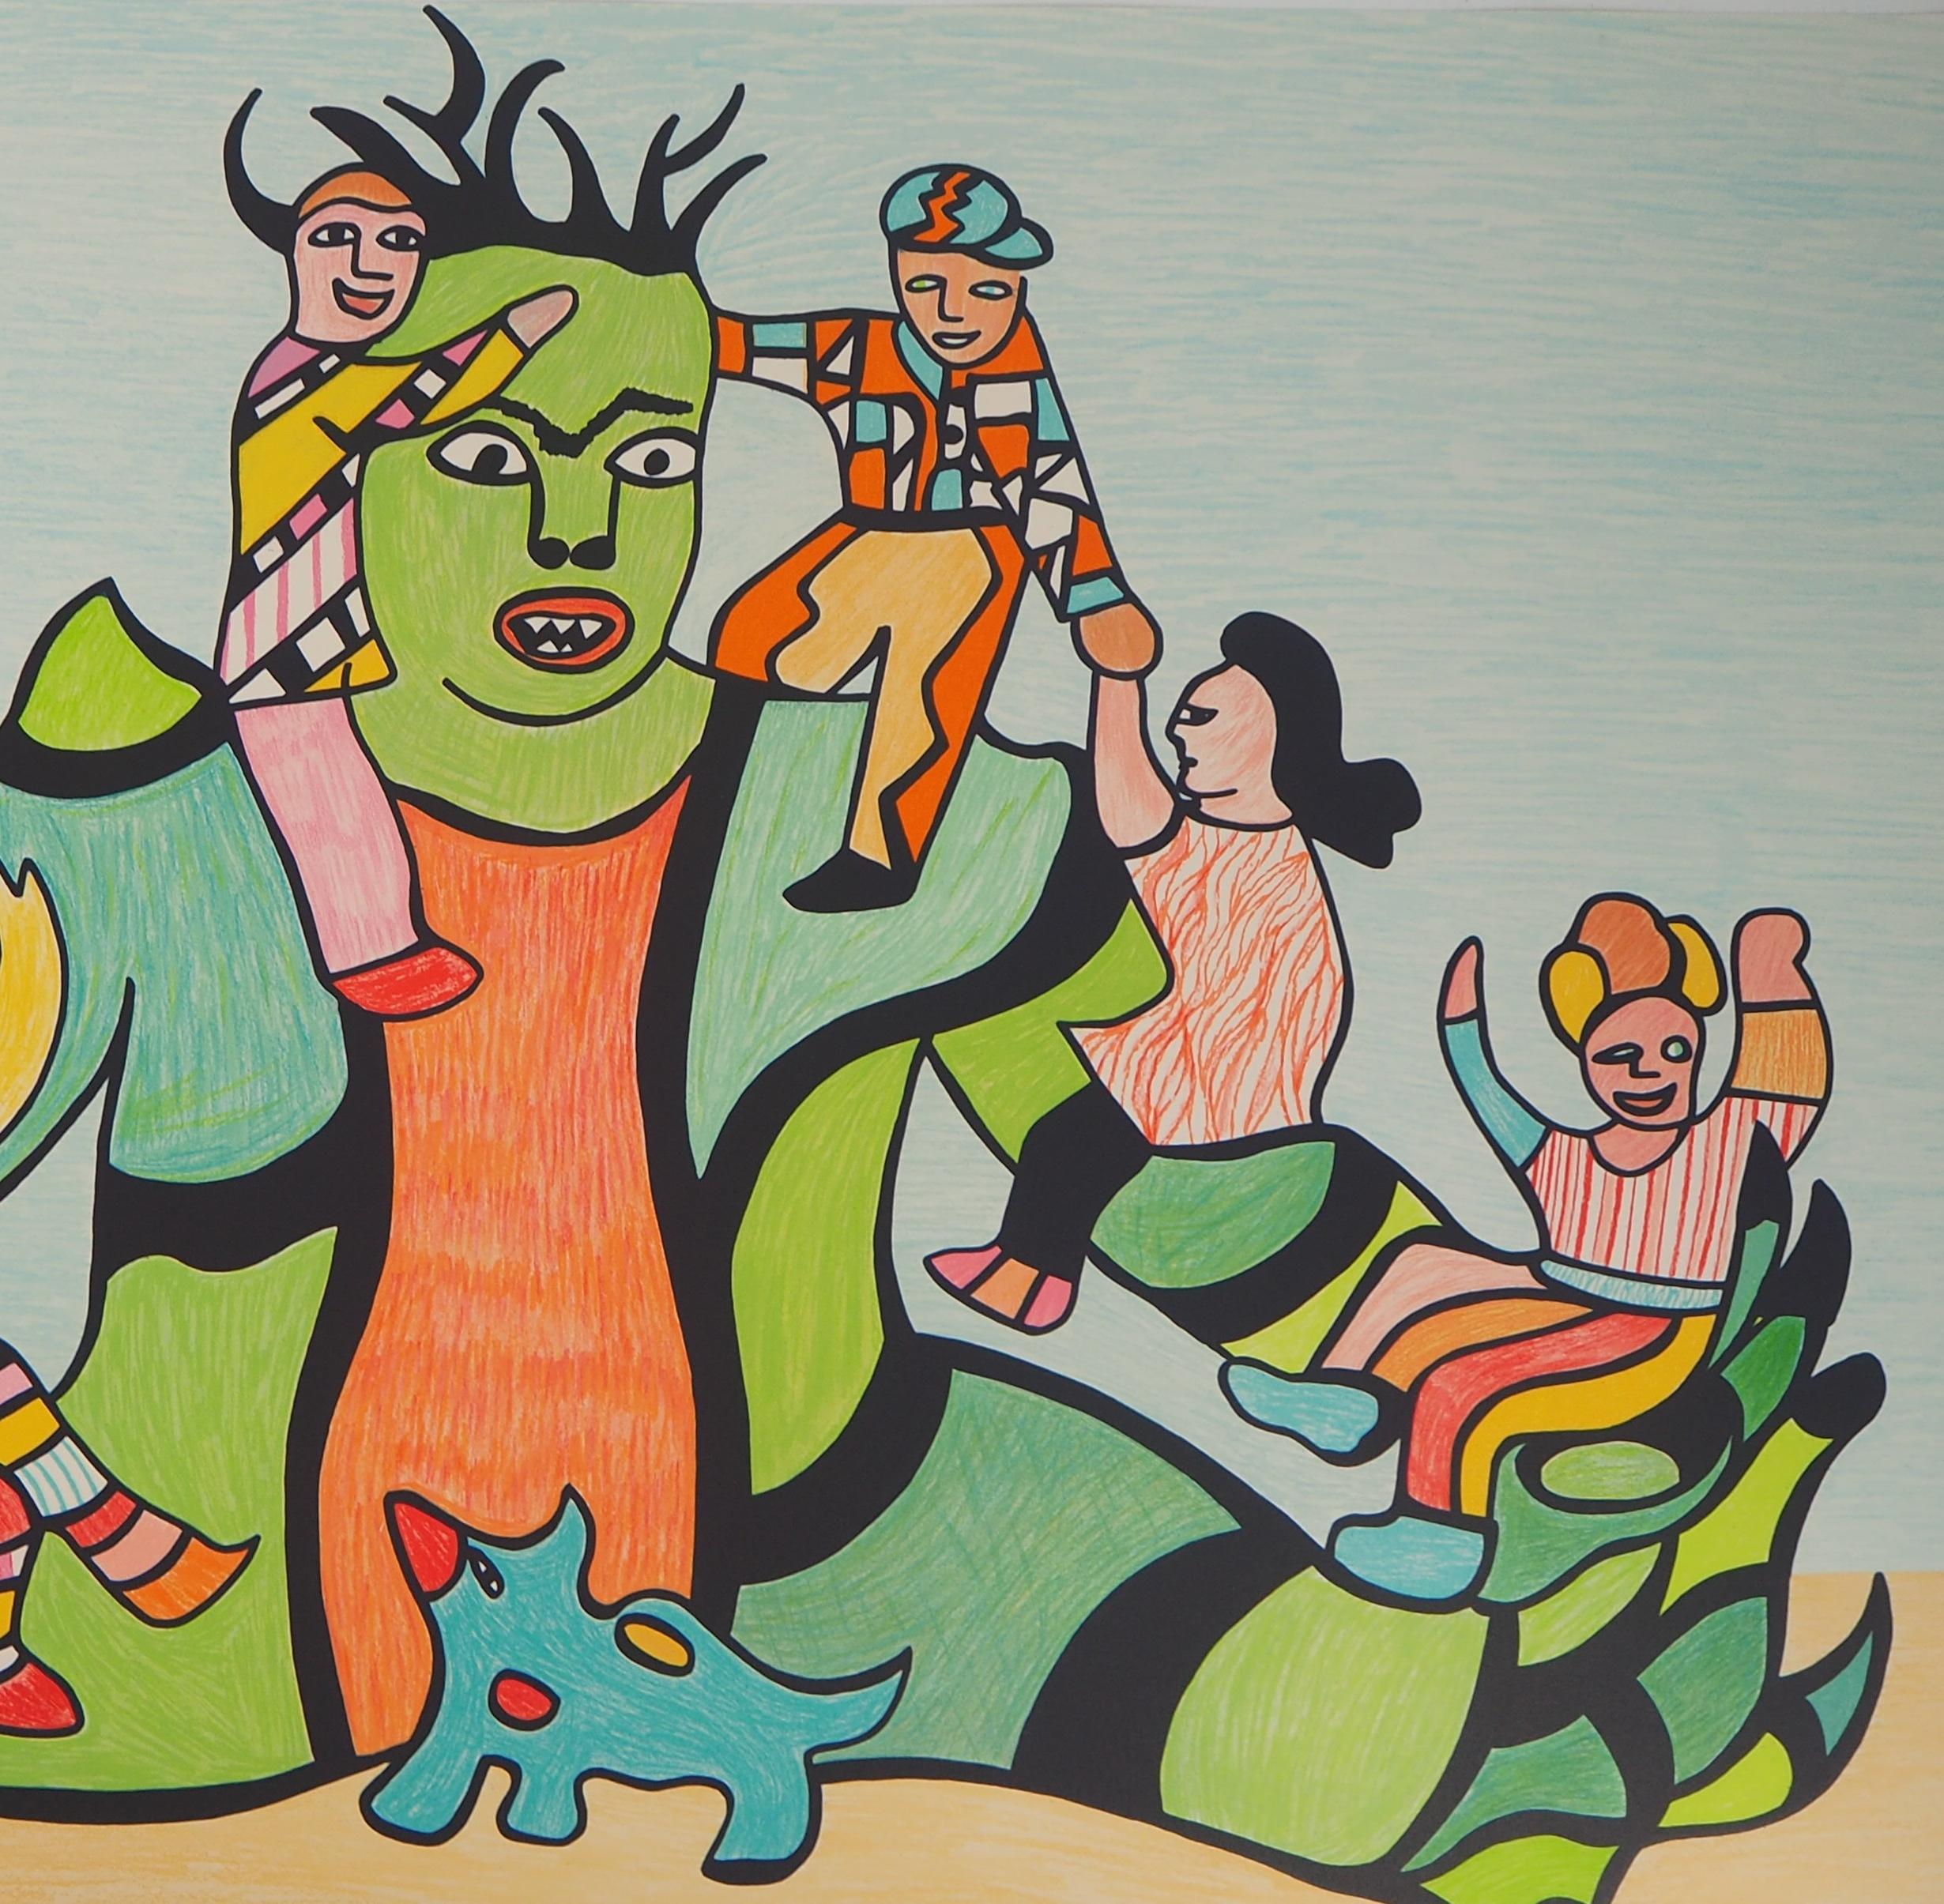 Niki de Saint Phalle
Funfair : Green Man, Happy Children and Dog, 1995

Original lithograph
Handsigned in pencil
Numbered / 250
On Arches vellum 65 x 105 cm (c. 26 x 42 in)

Excellent condition